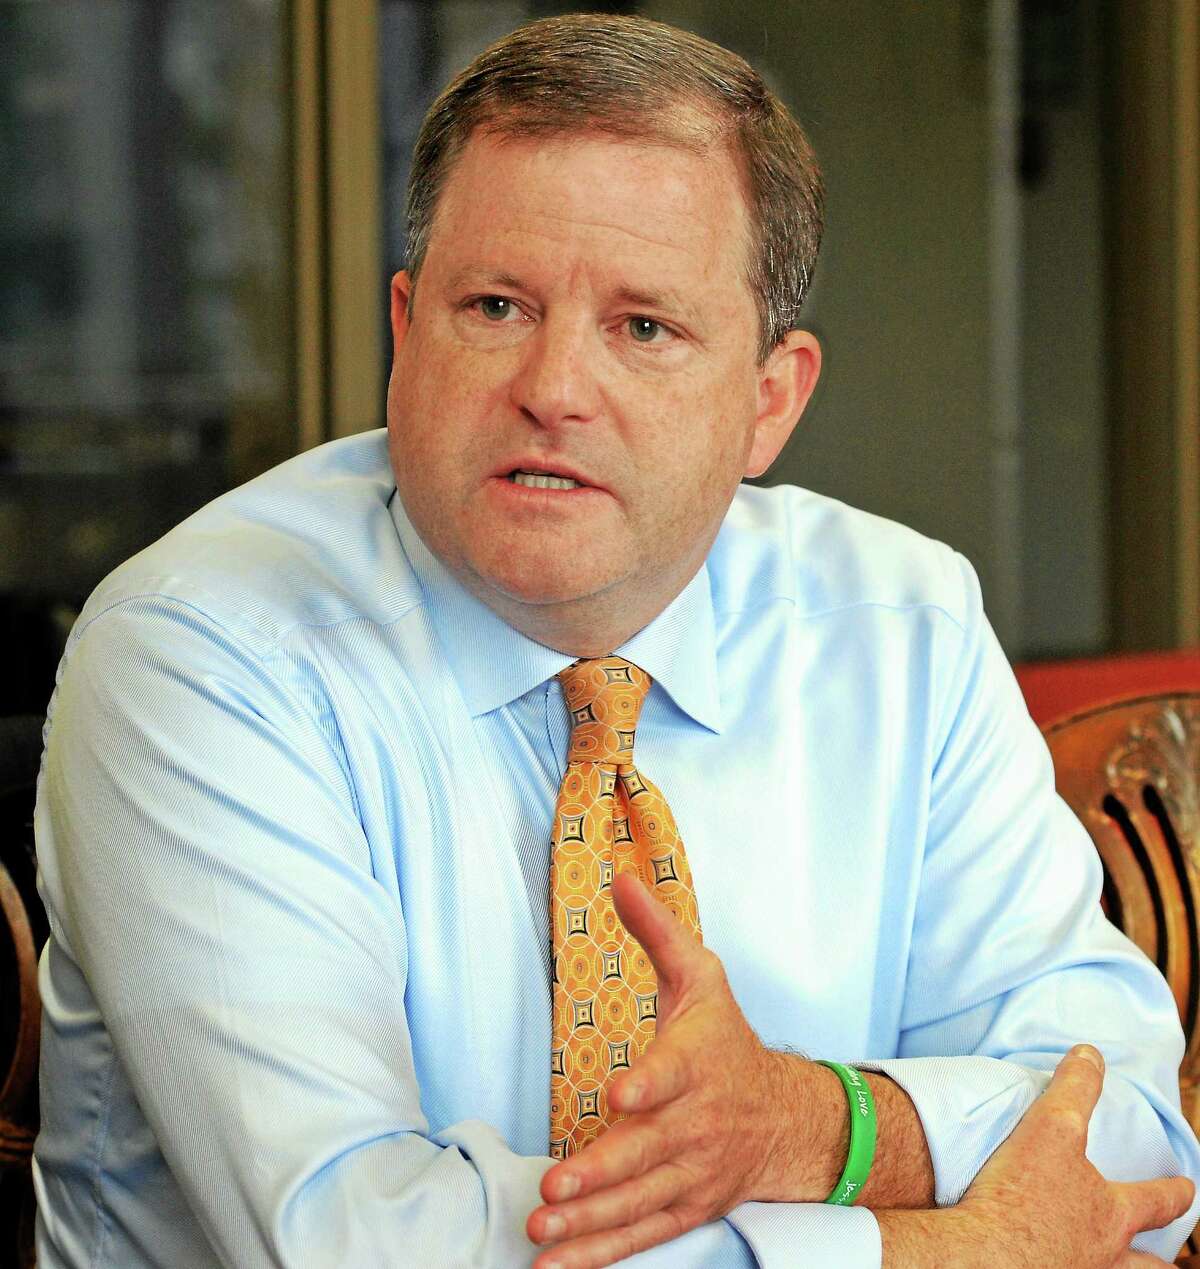 Gubernatorial candidate and State Sen. John McKinney, R-Fairfield, in a conversation with the Register editorial board.